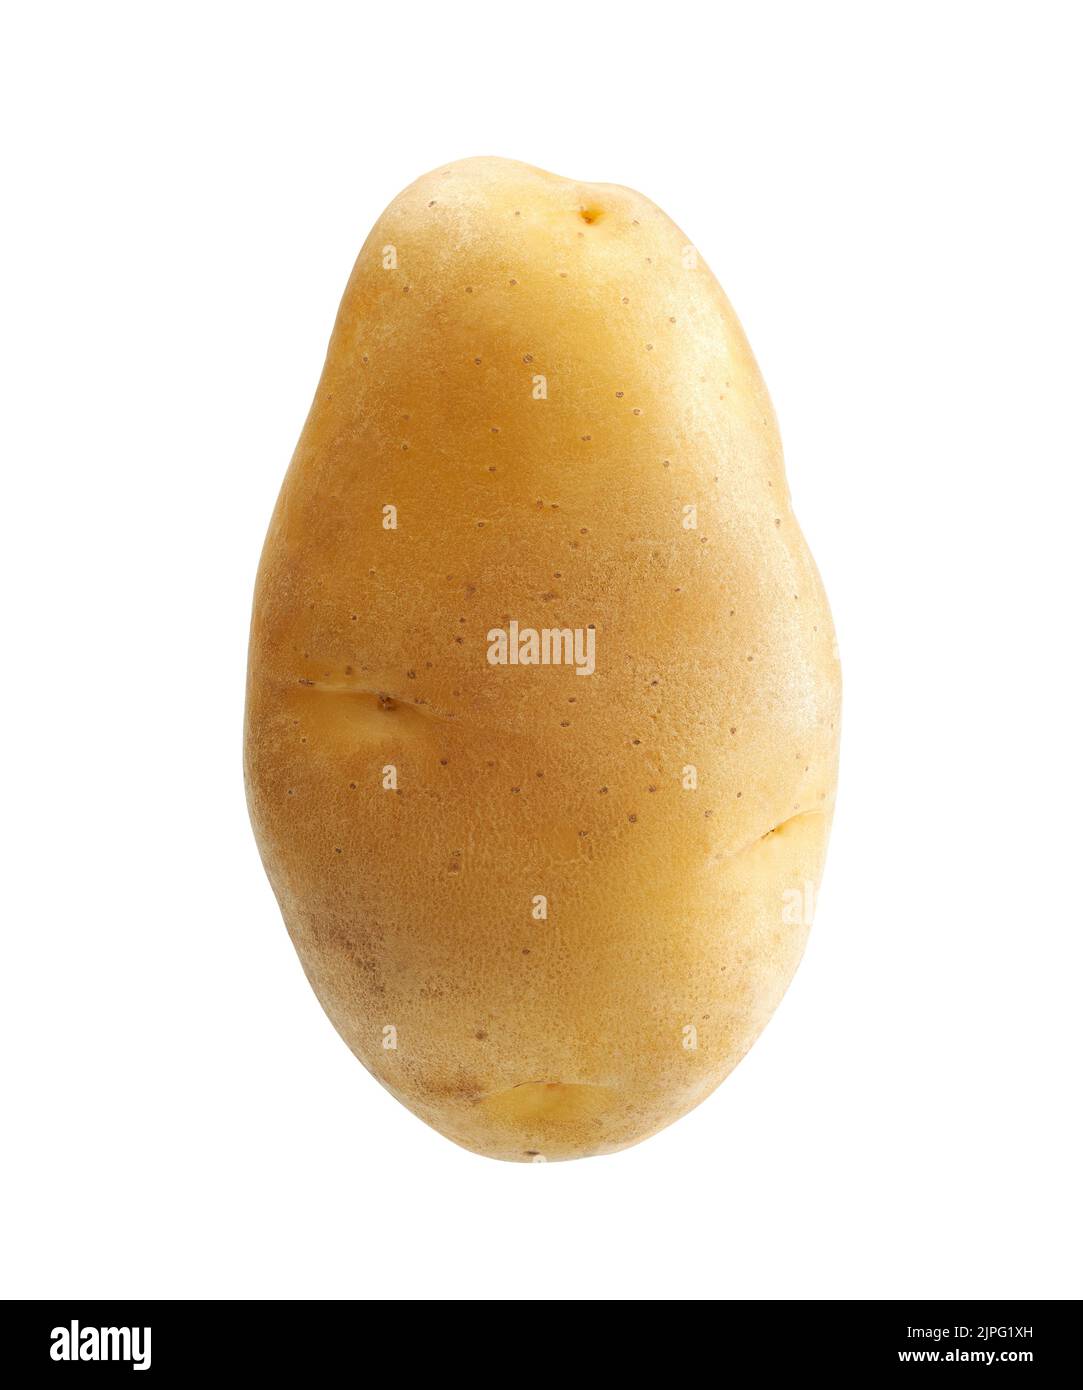 Unpeeled raw potato isolated on white background -  Clipping Path included Stock Photo